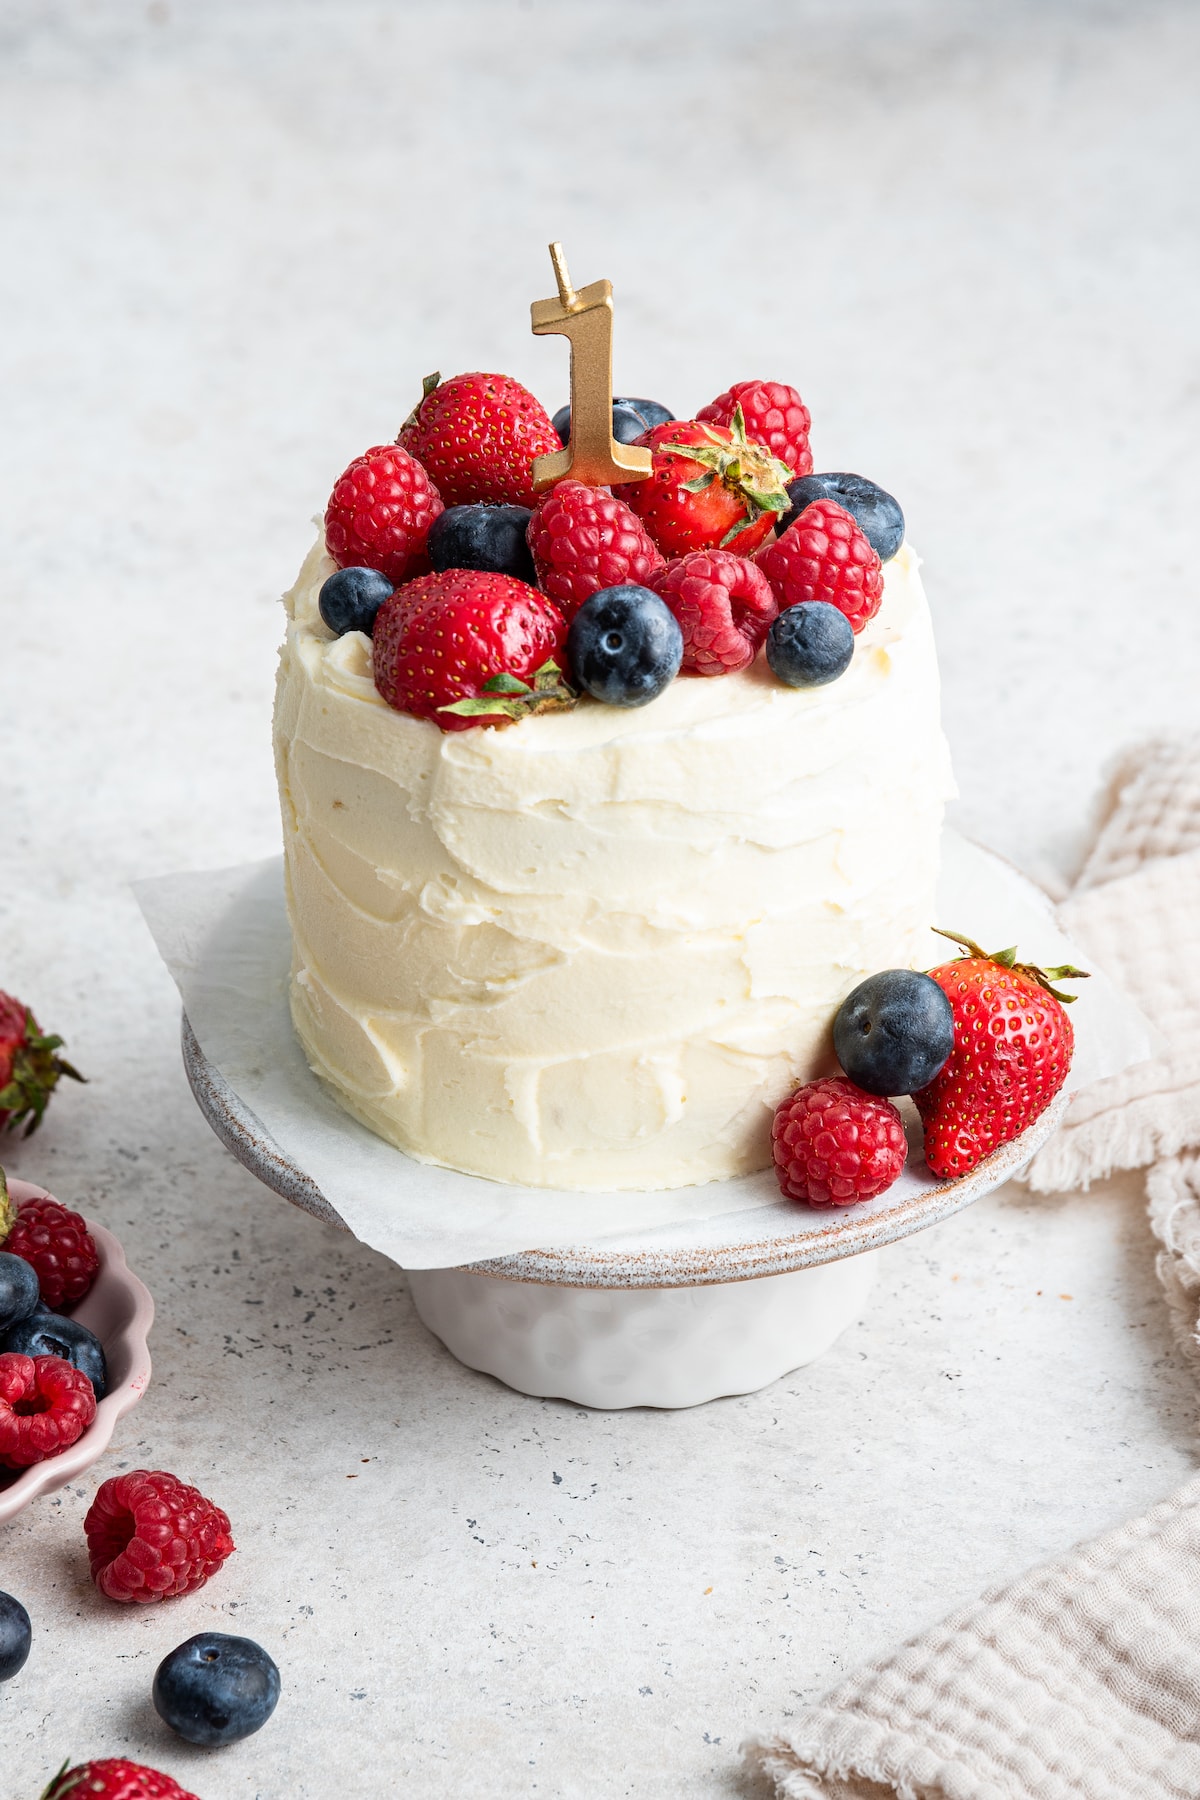 A frosted smash cake with a one candle topped with fresh berries sitting on a cake stand.